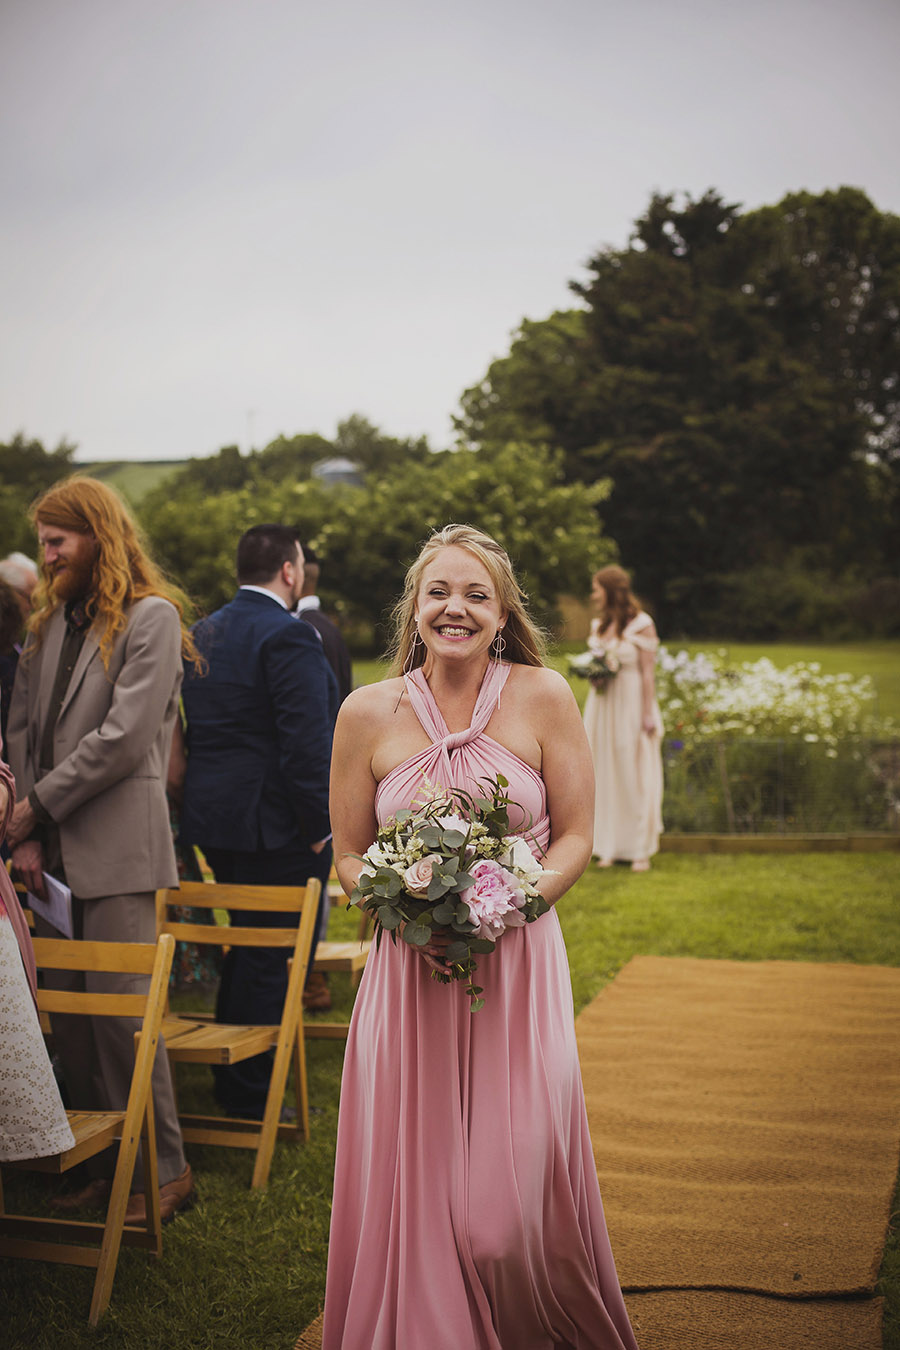 Relaxed outdoor wedding at Cott Farm Barn with images by Heather Birnie Photography on the English Wedding Blog (14)